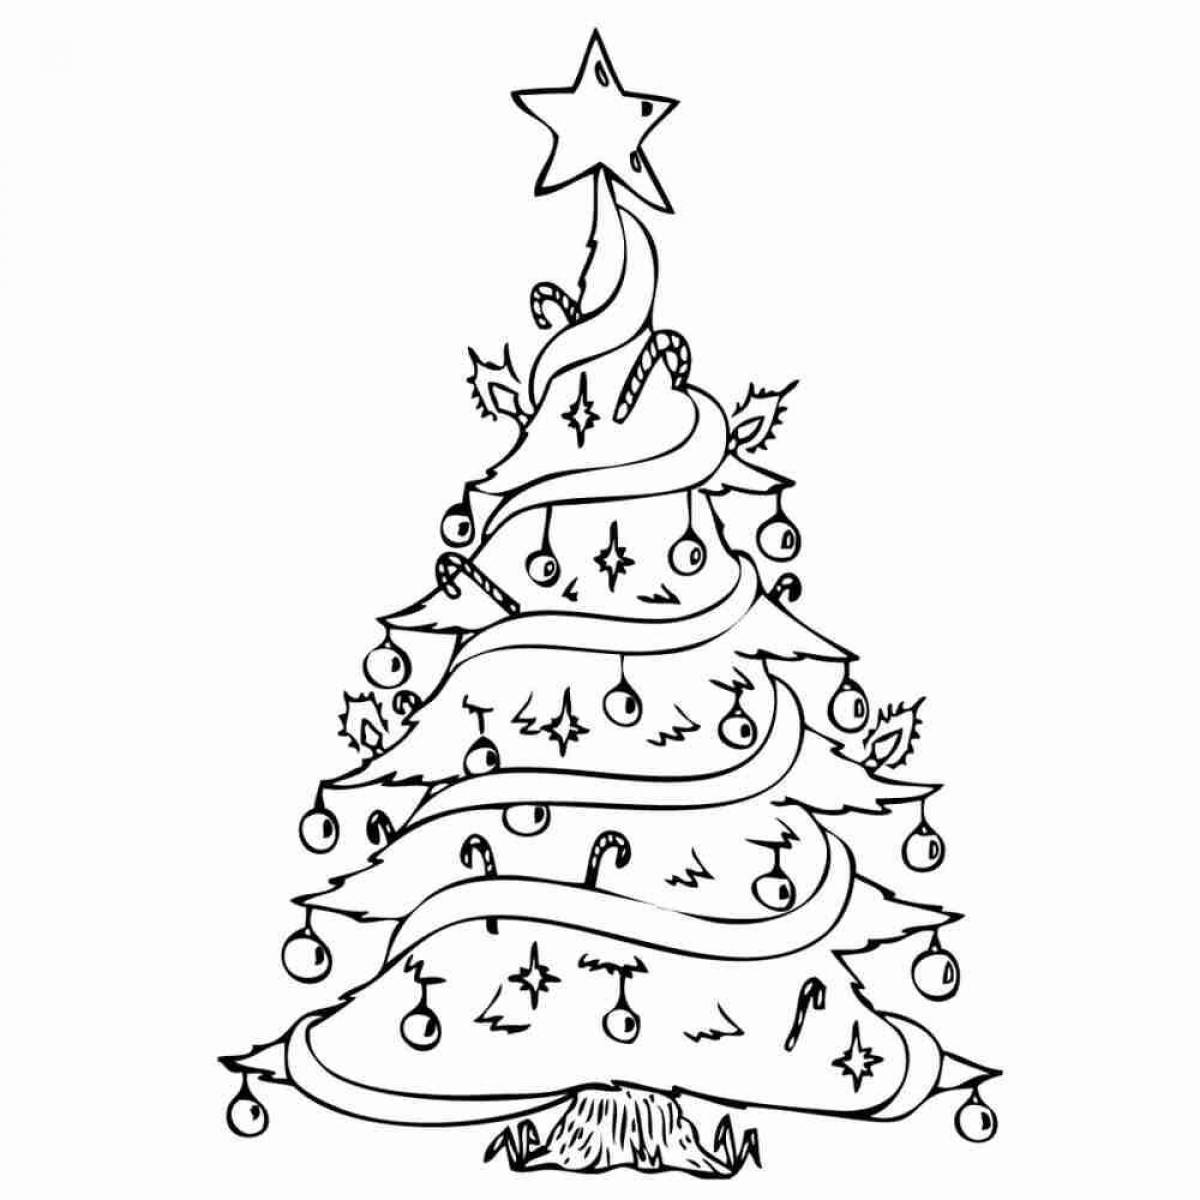 Amazing Christmas tree coloring book